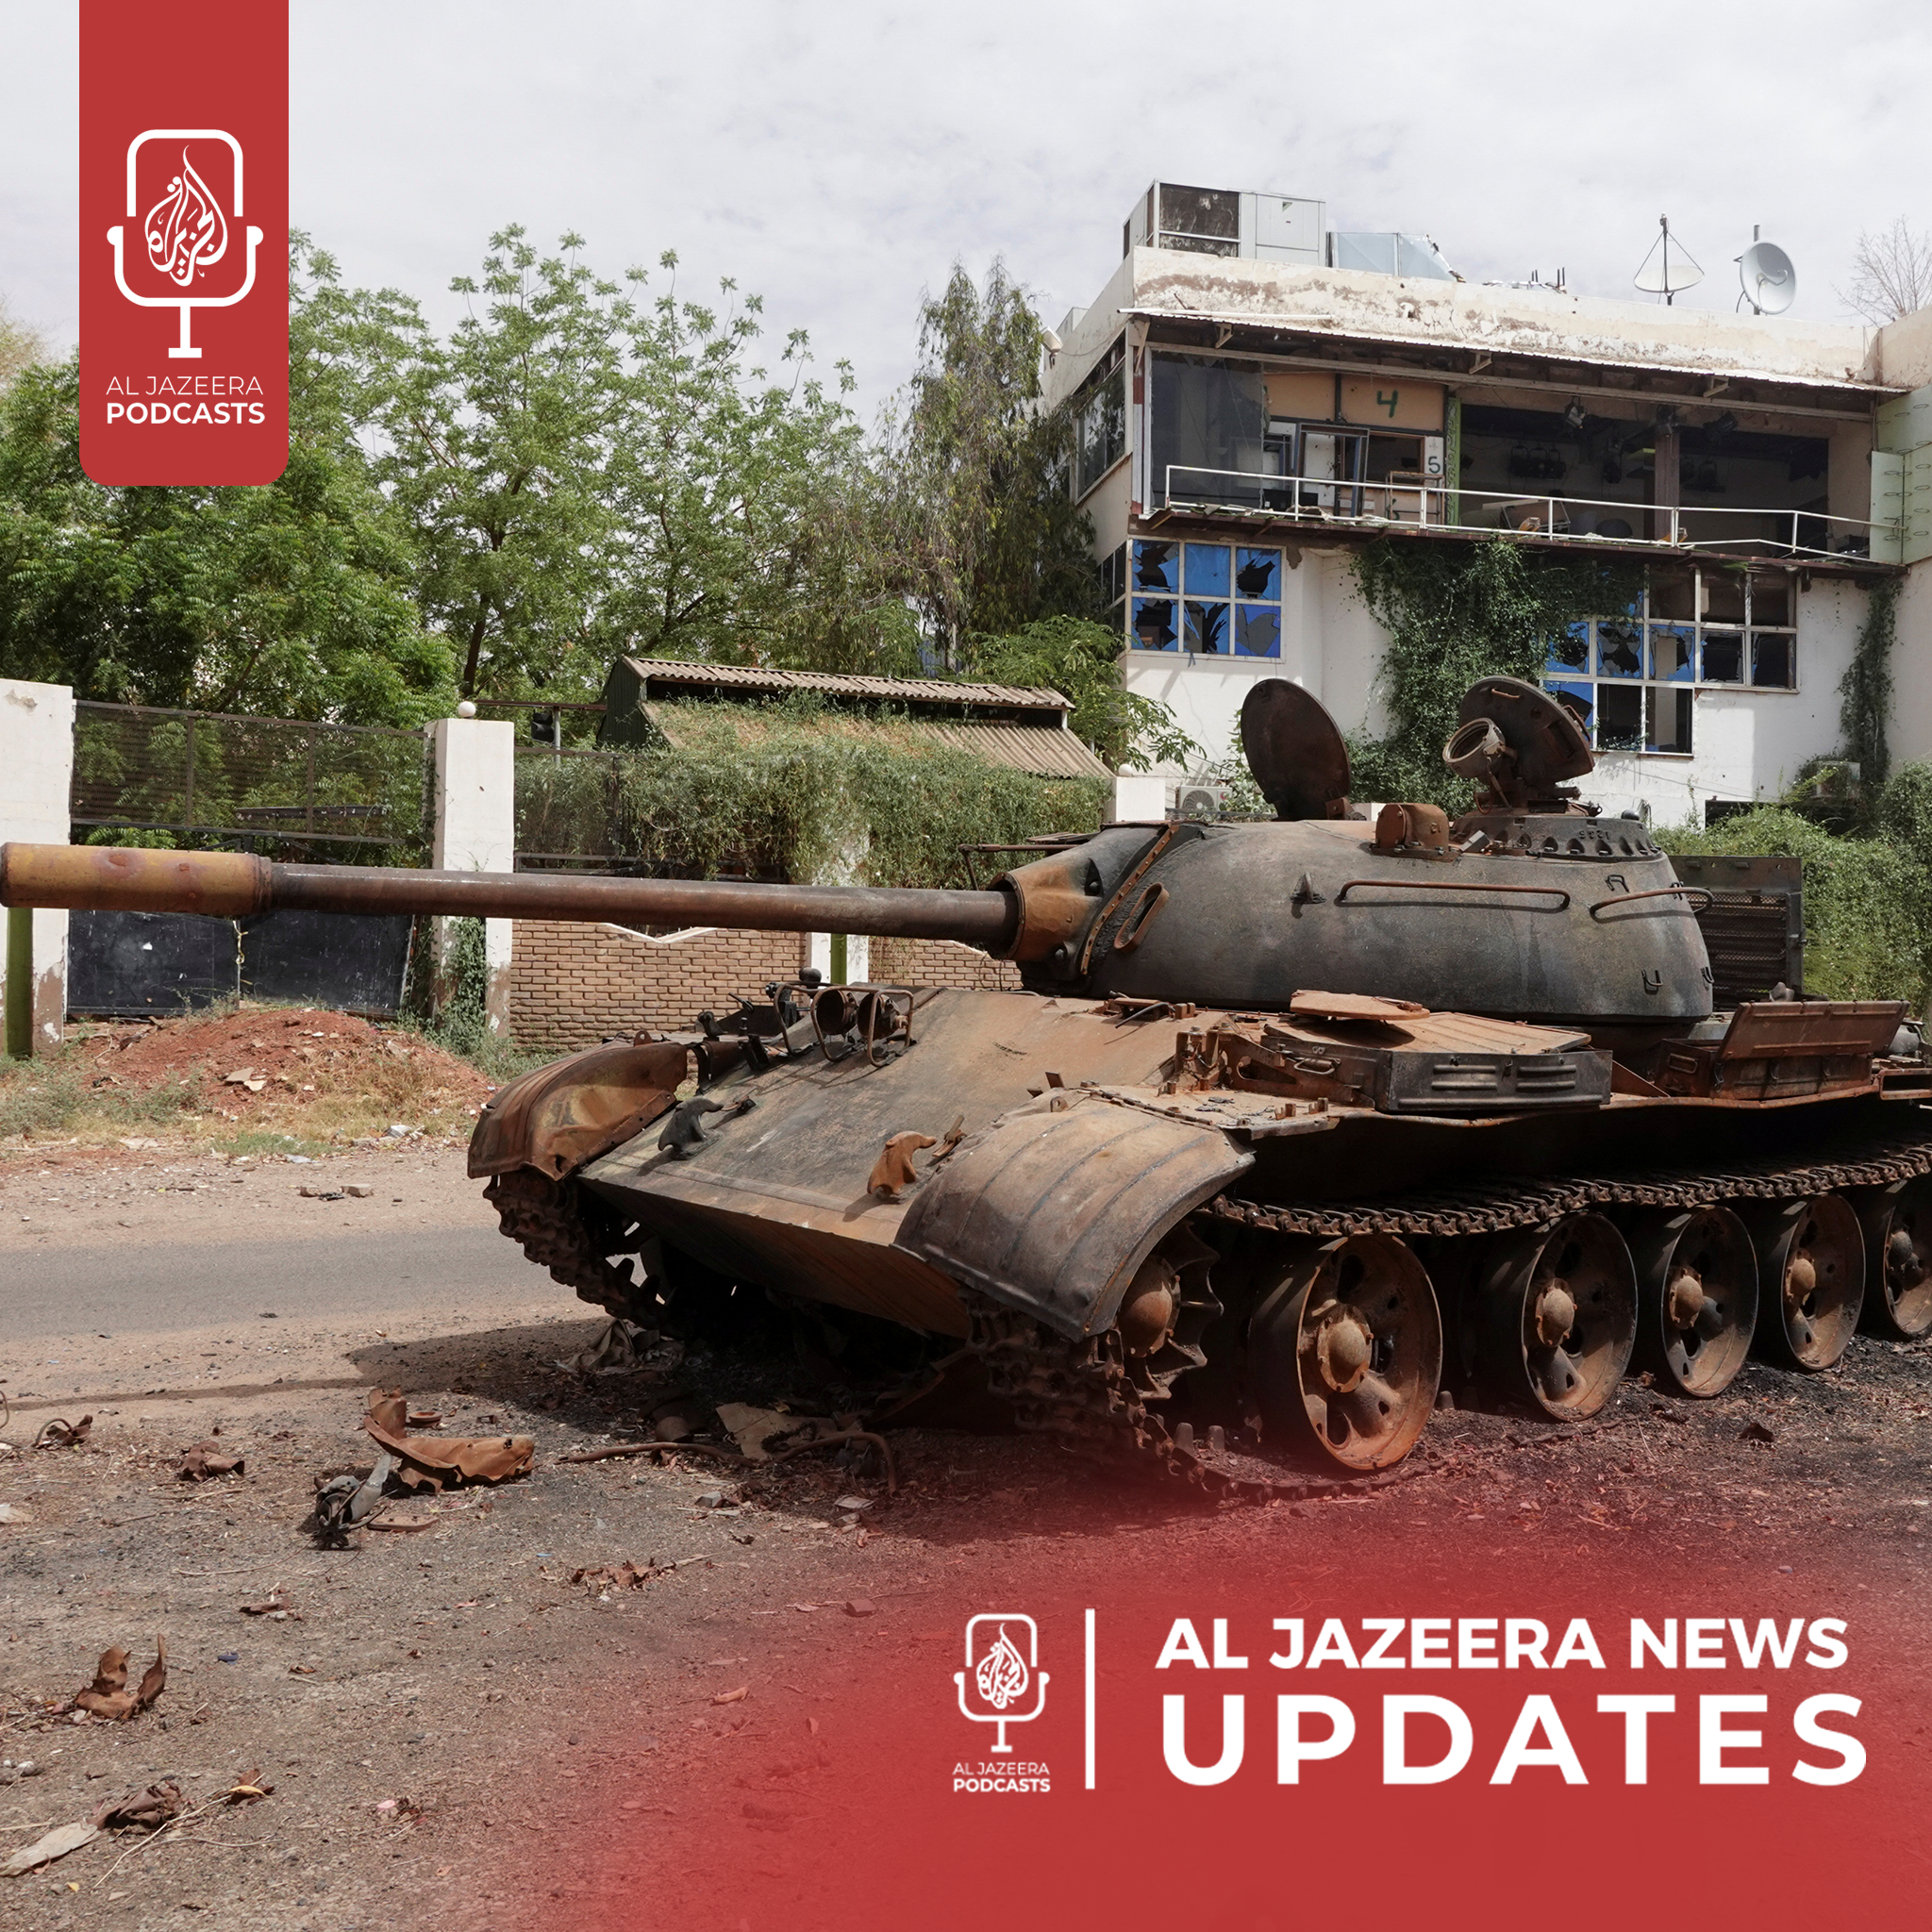 Hamas responds to ceasefire proposal, Sudan's army and RSF blacklisted